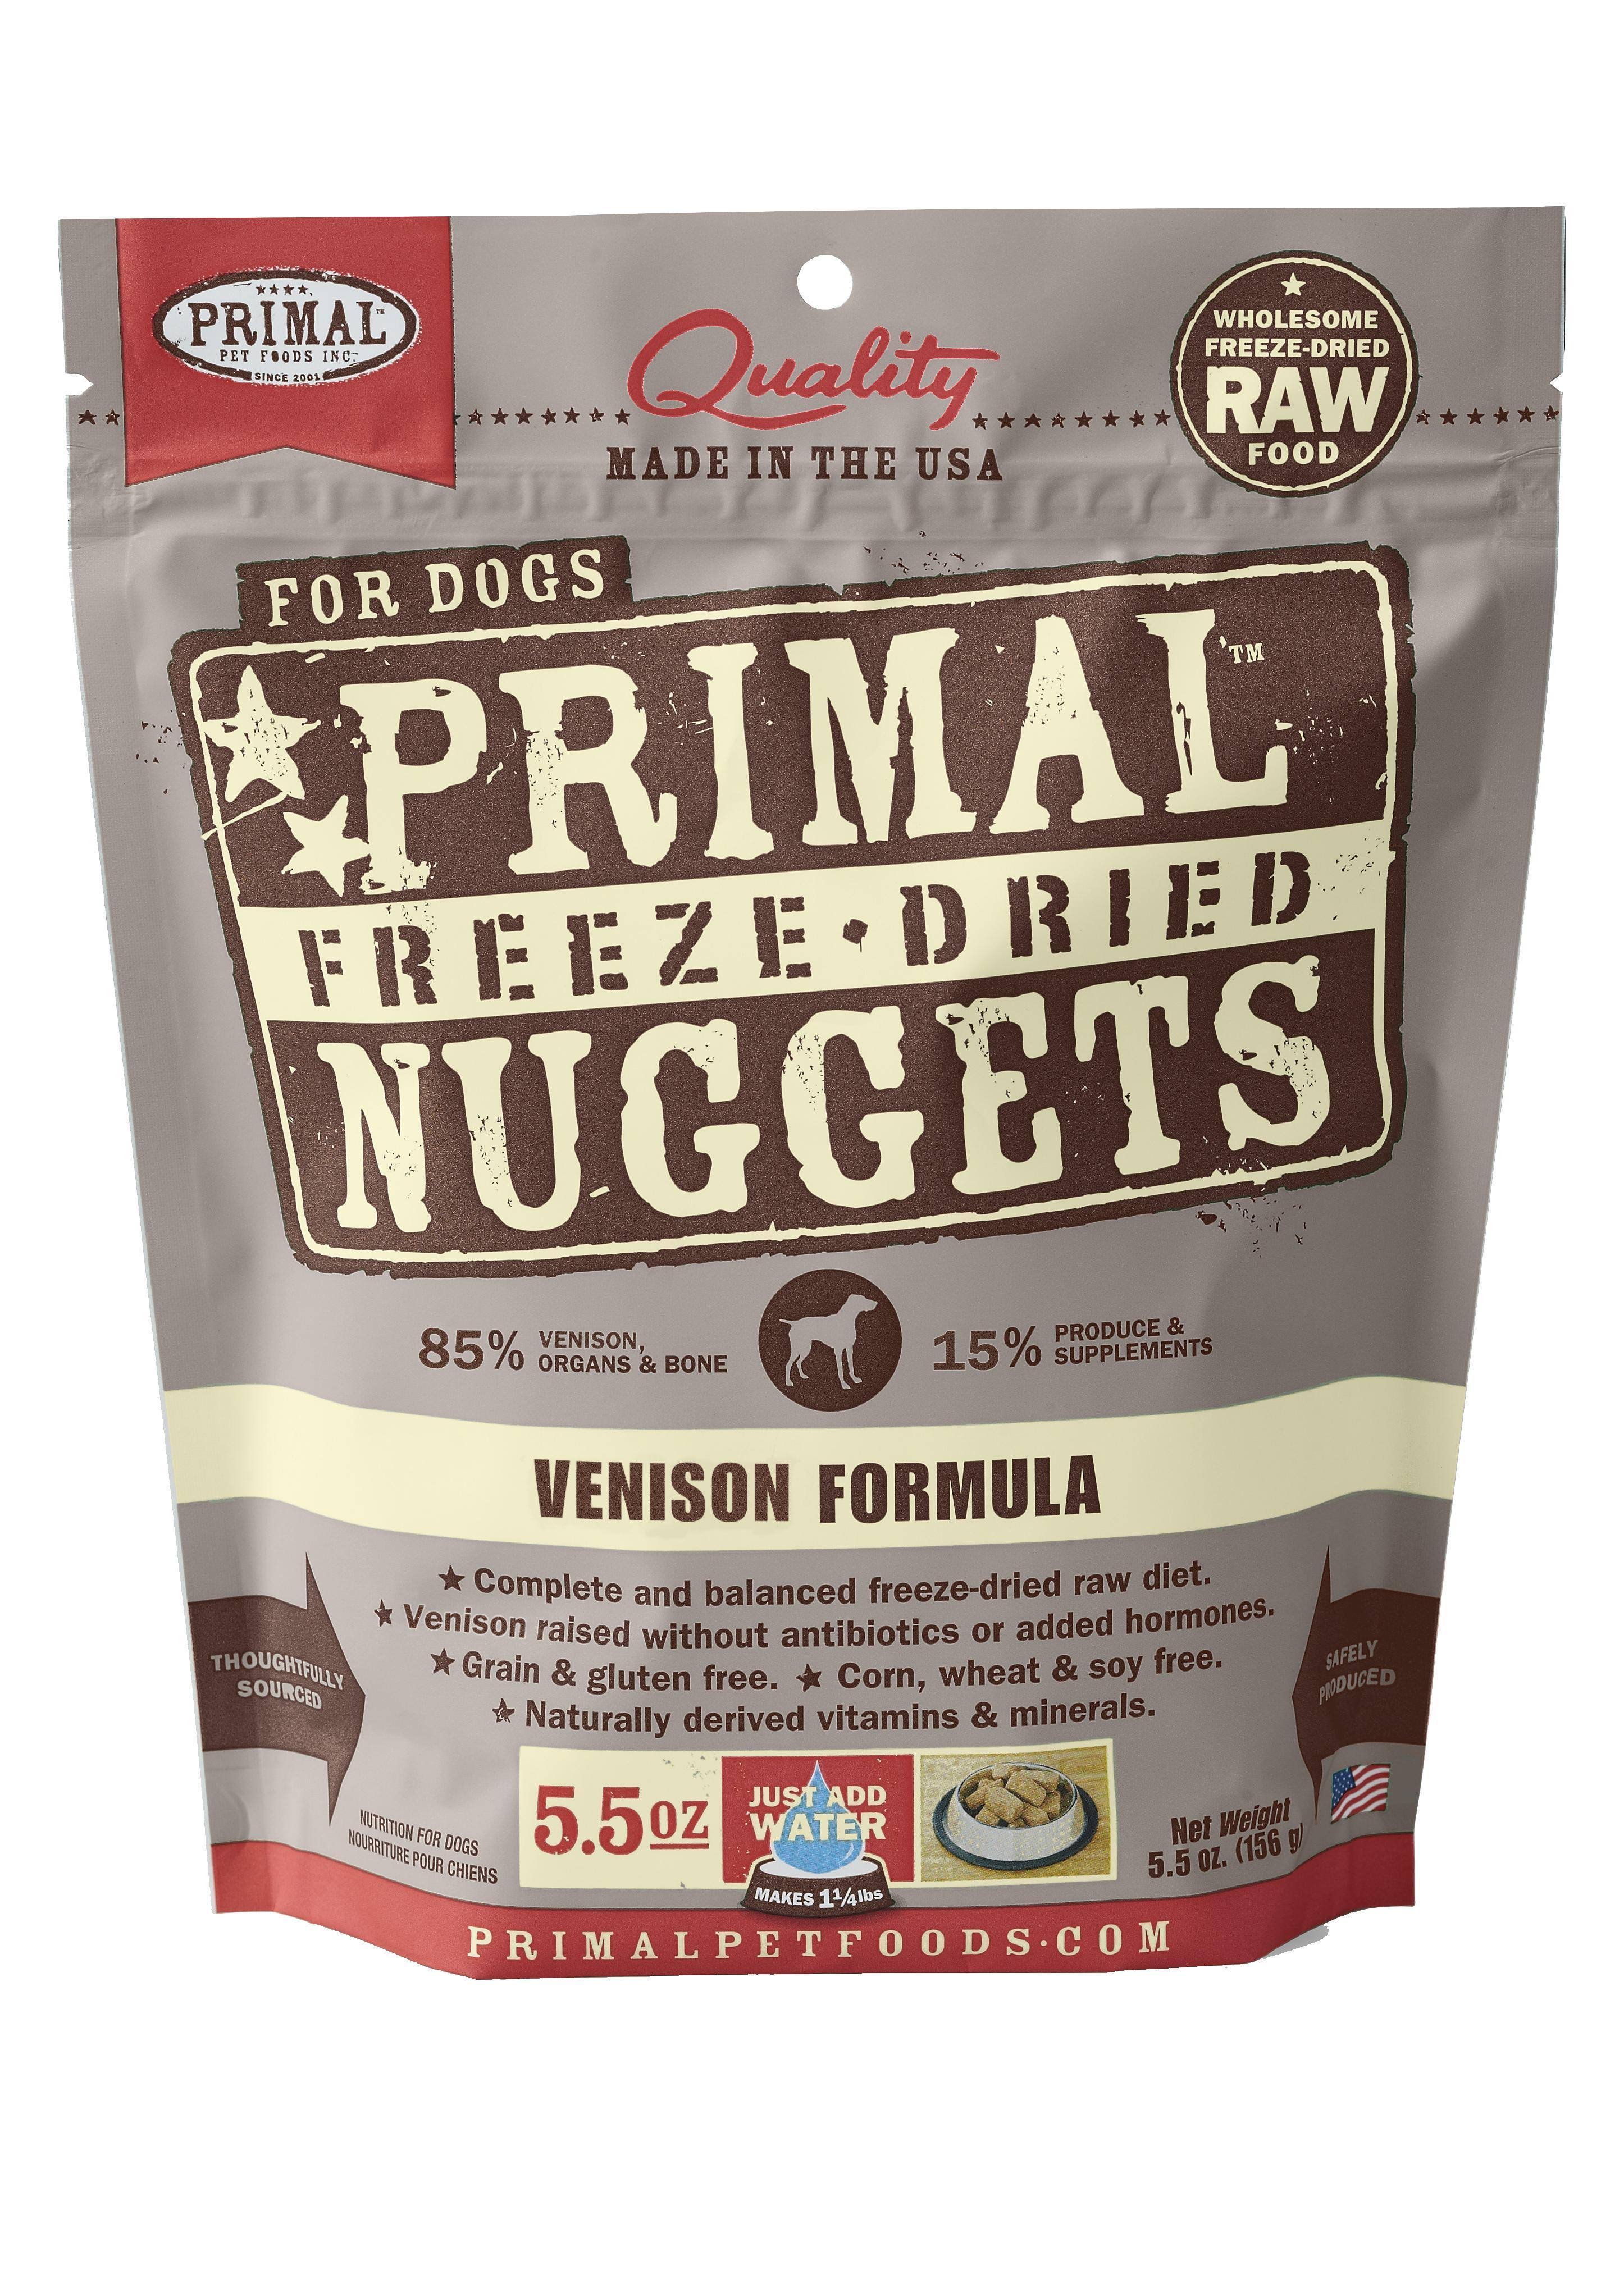 Primal Freeze Dried Dog Food Nuggets Venison Formula, Crafted in The